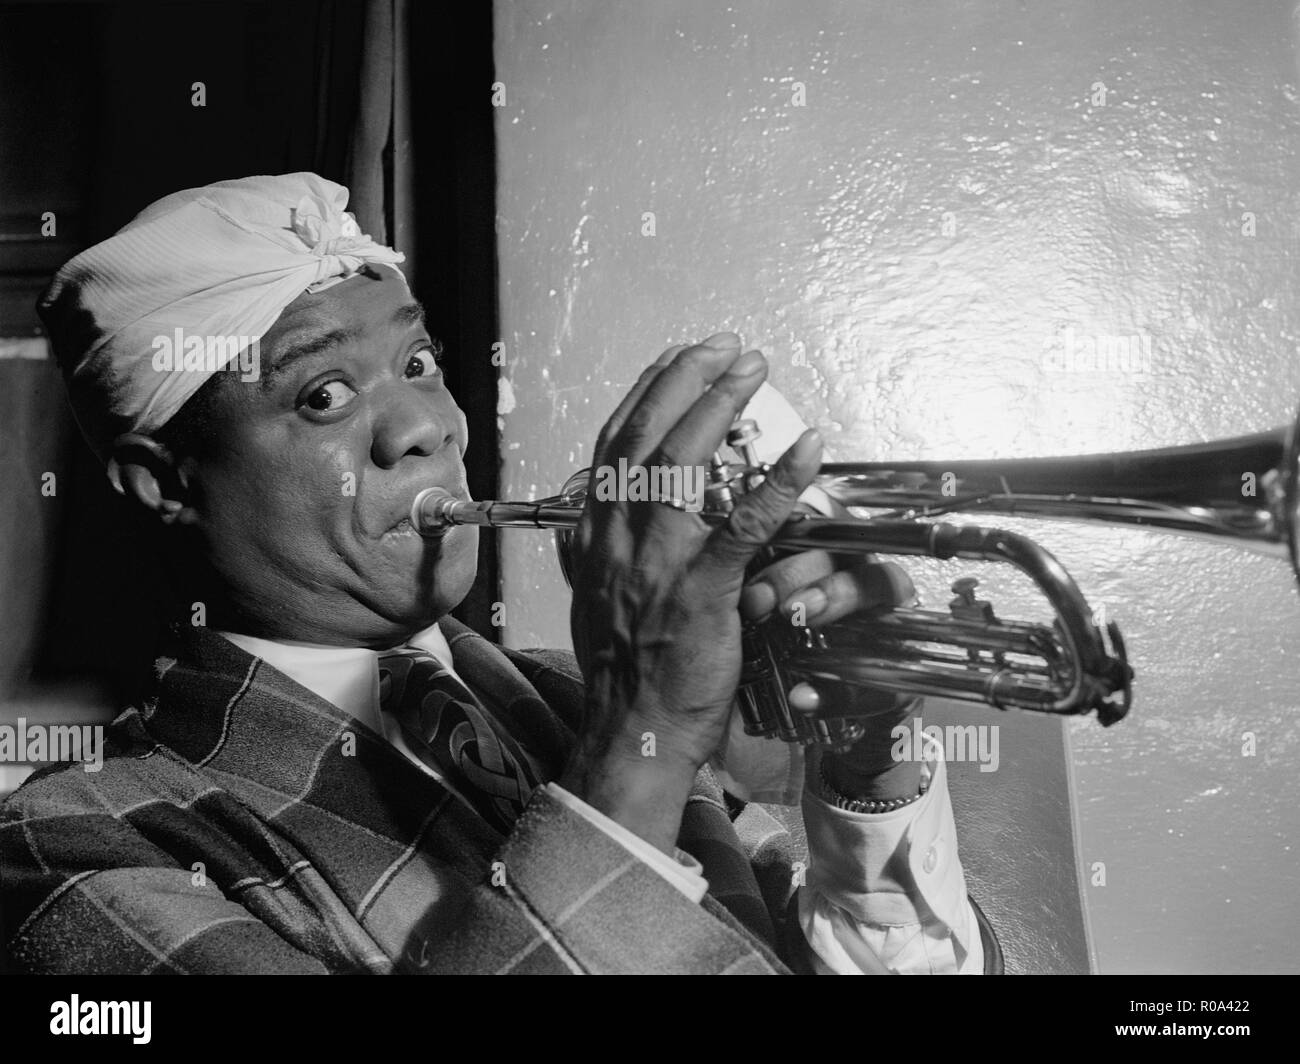 Biography of Louis Armstrong, Trumpeter and Entertainer